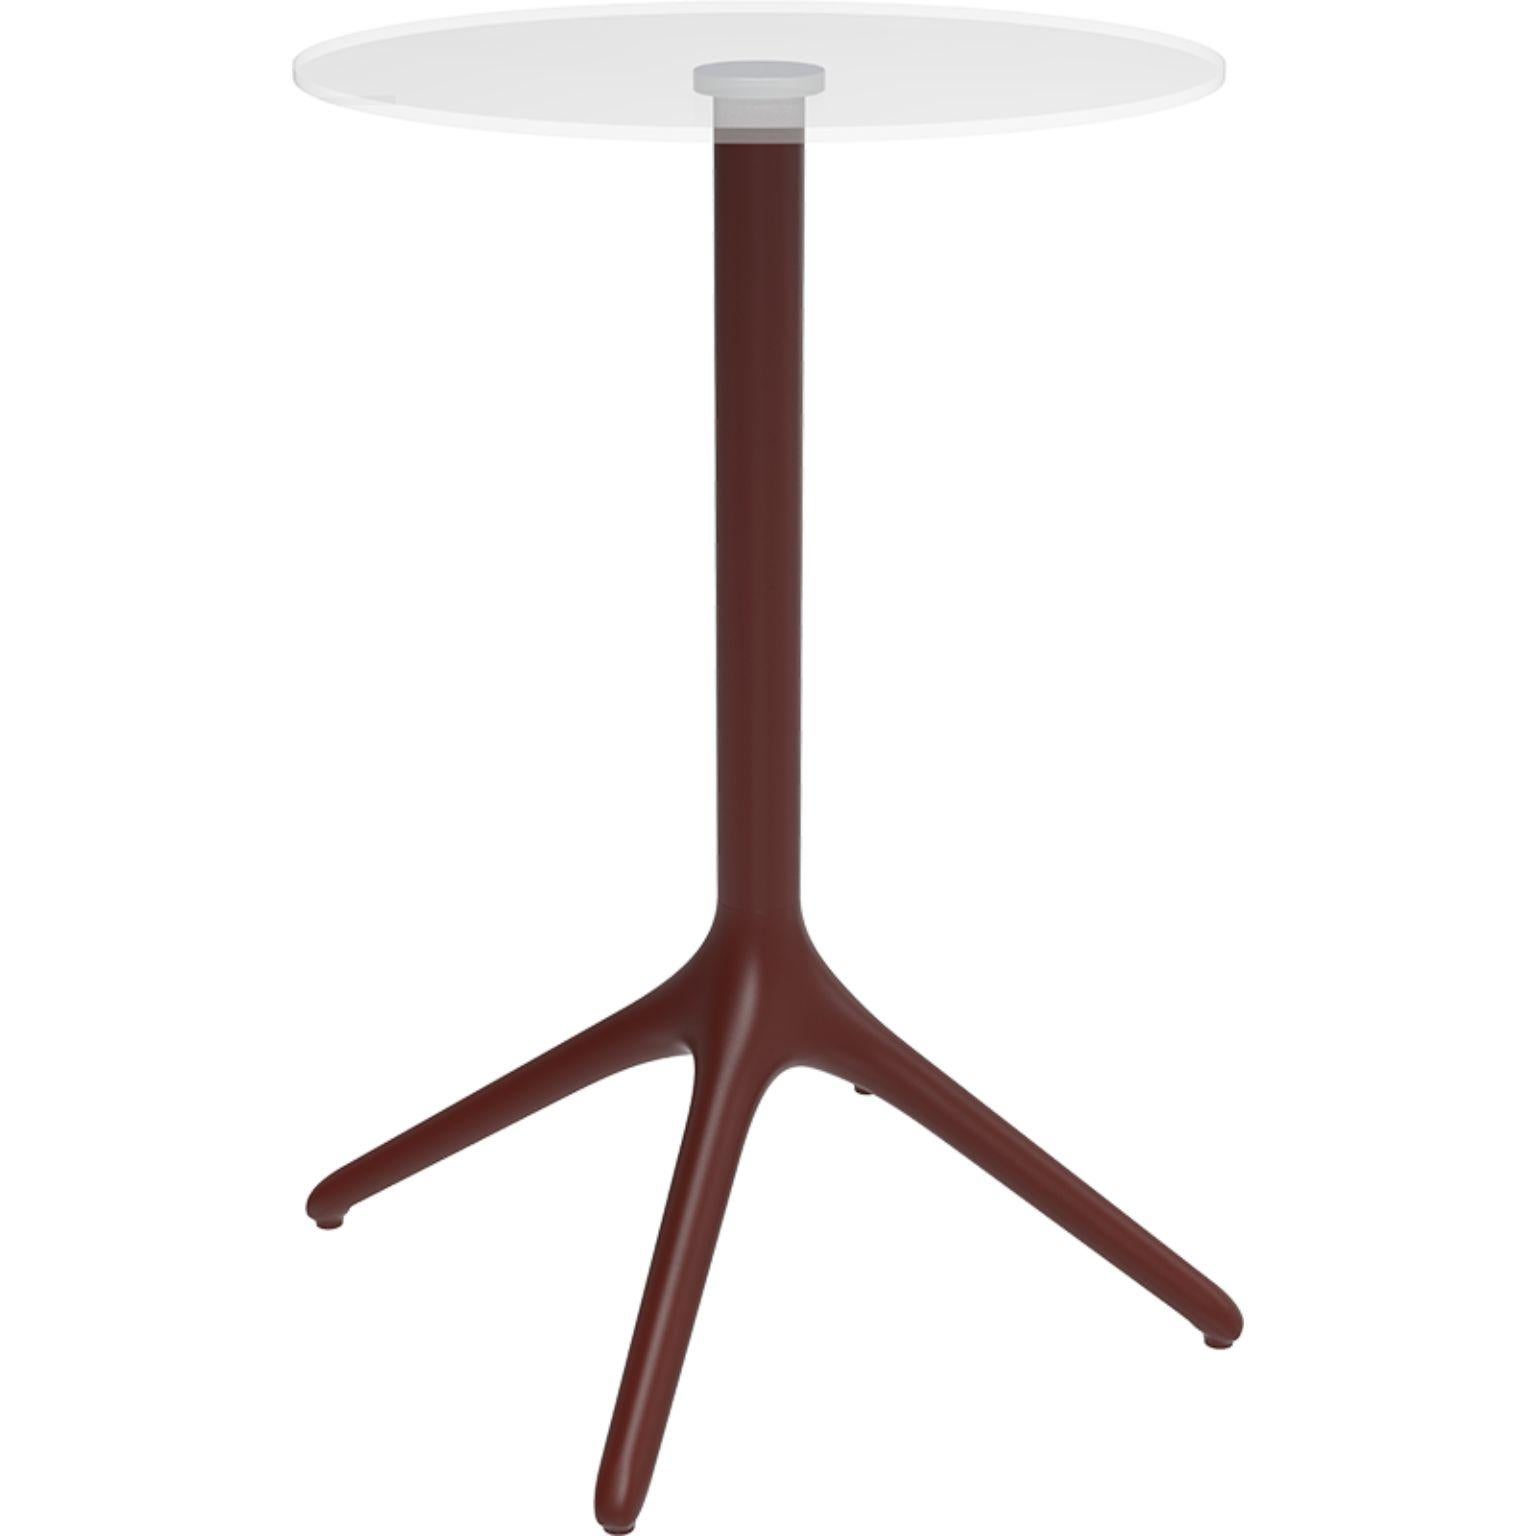 Uni burgundy table XL 105 by MOWEE
Dimensions: D50 x H105 cm
Material: aluminium, tempered glass
Weight: 9.7 kg
Also available in different colours and finishes. 

A table designed to be as versatile as possible and can coexist with a variety